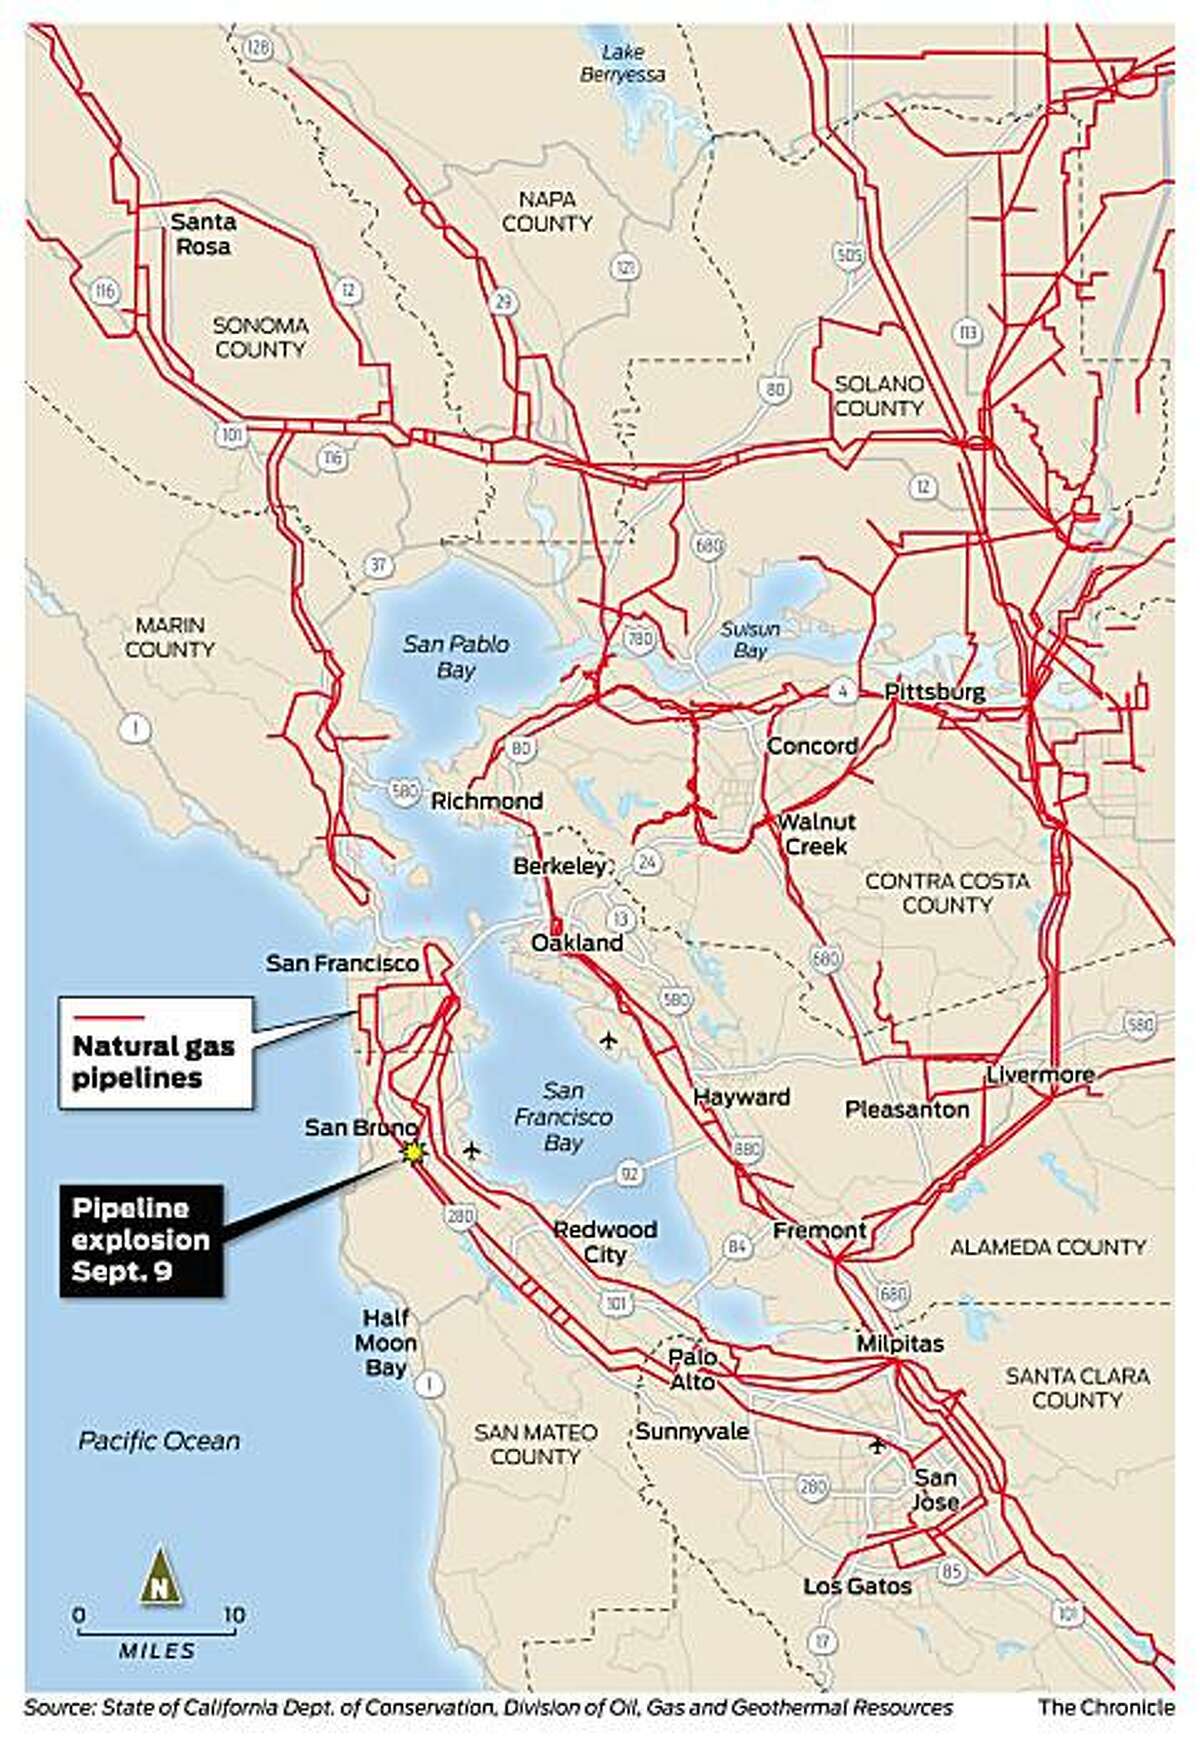 Map of natural gas lines in the Bay Area.